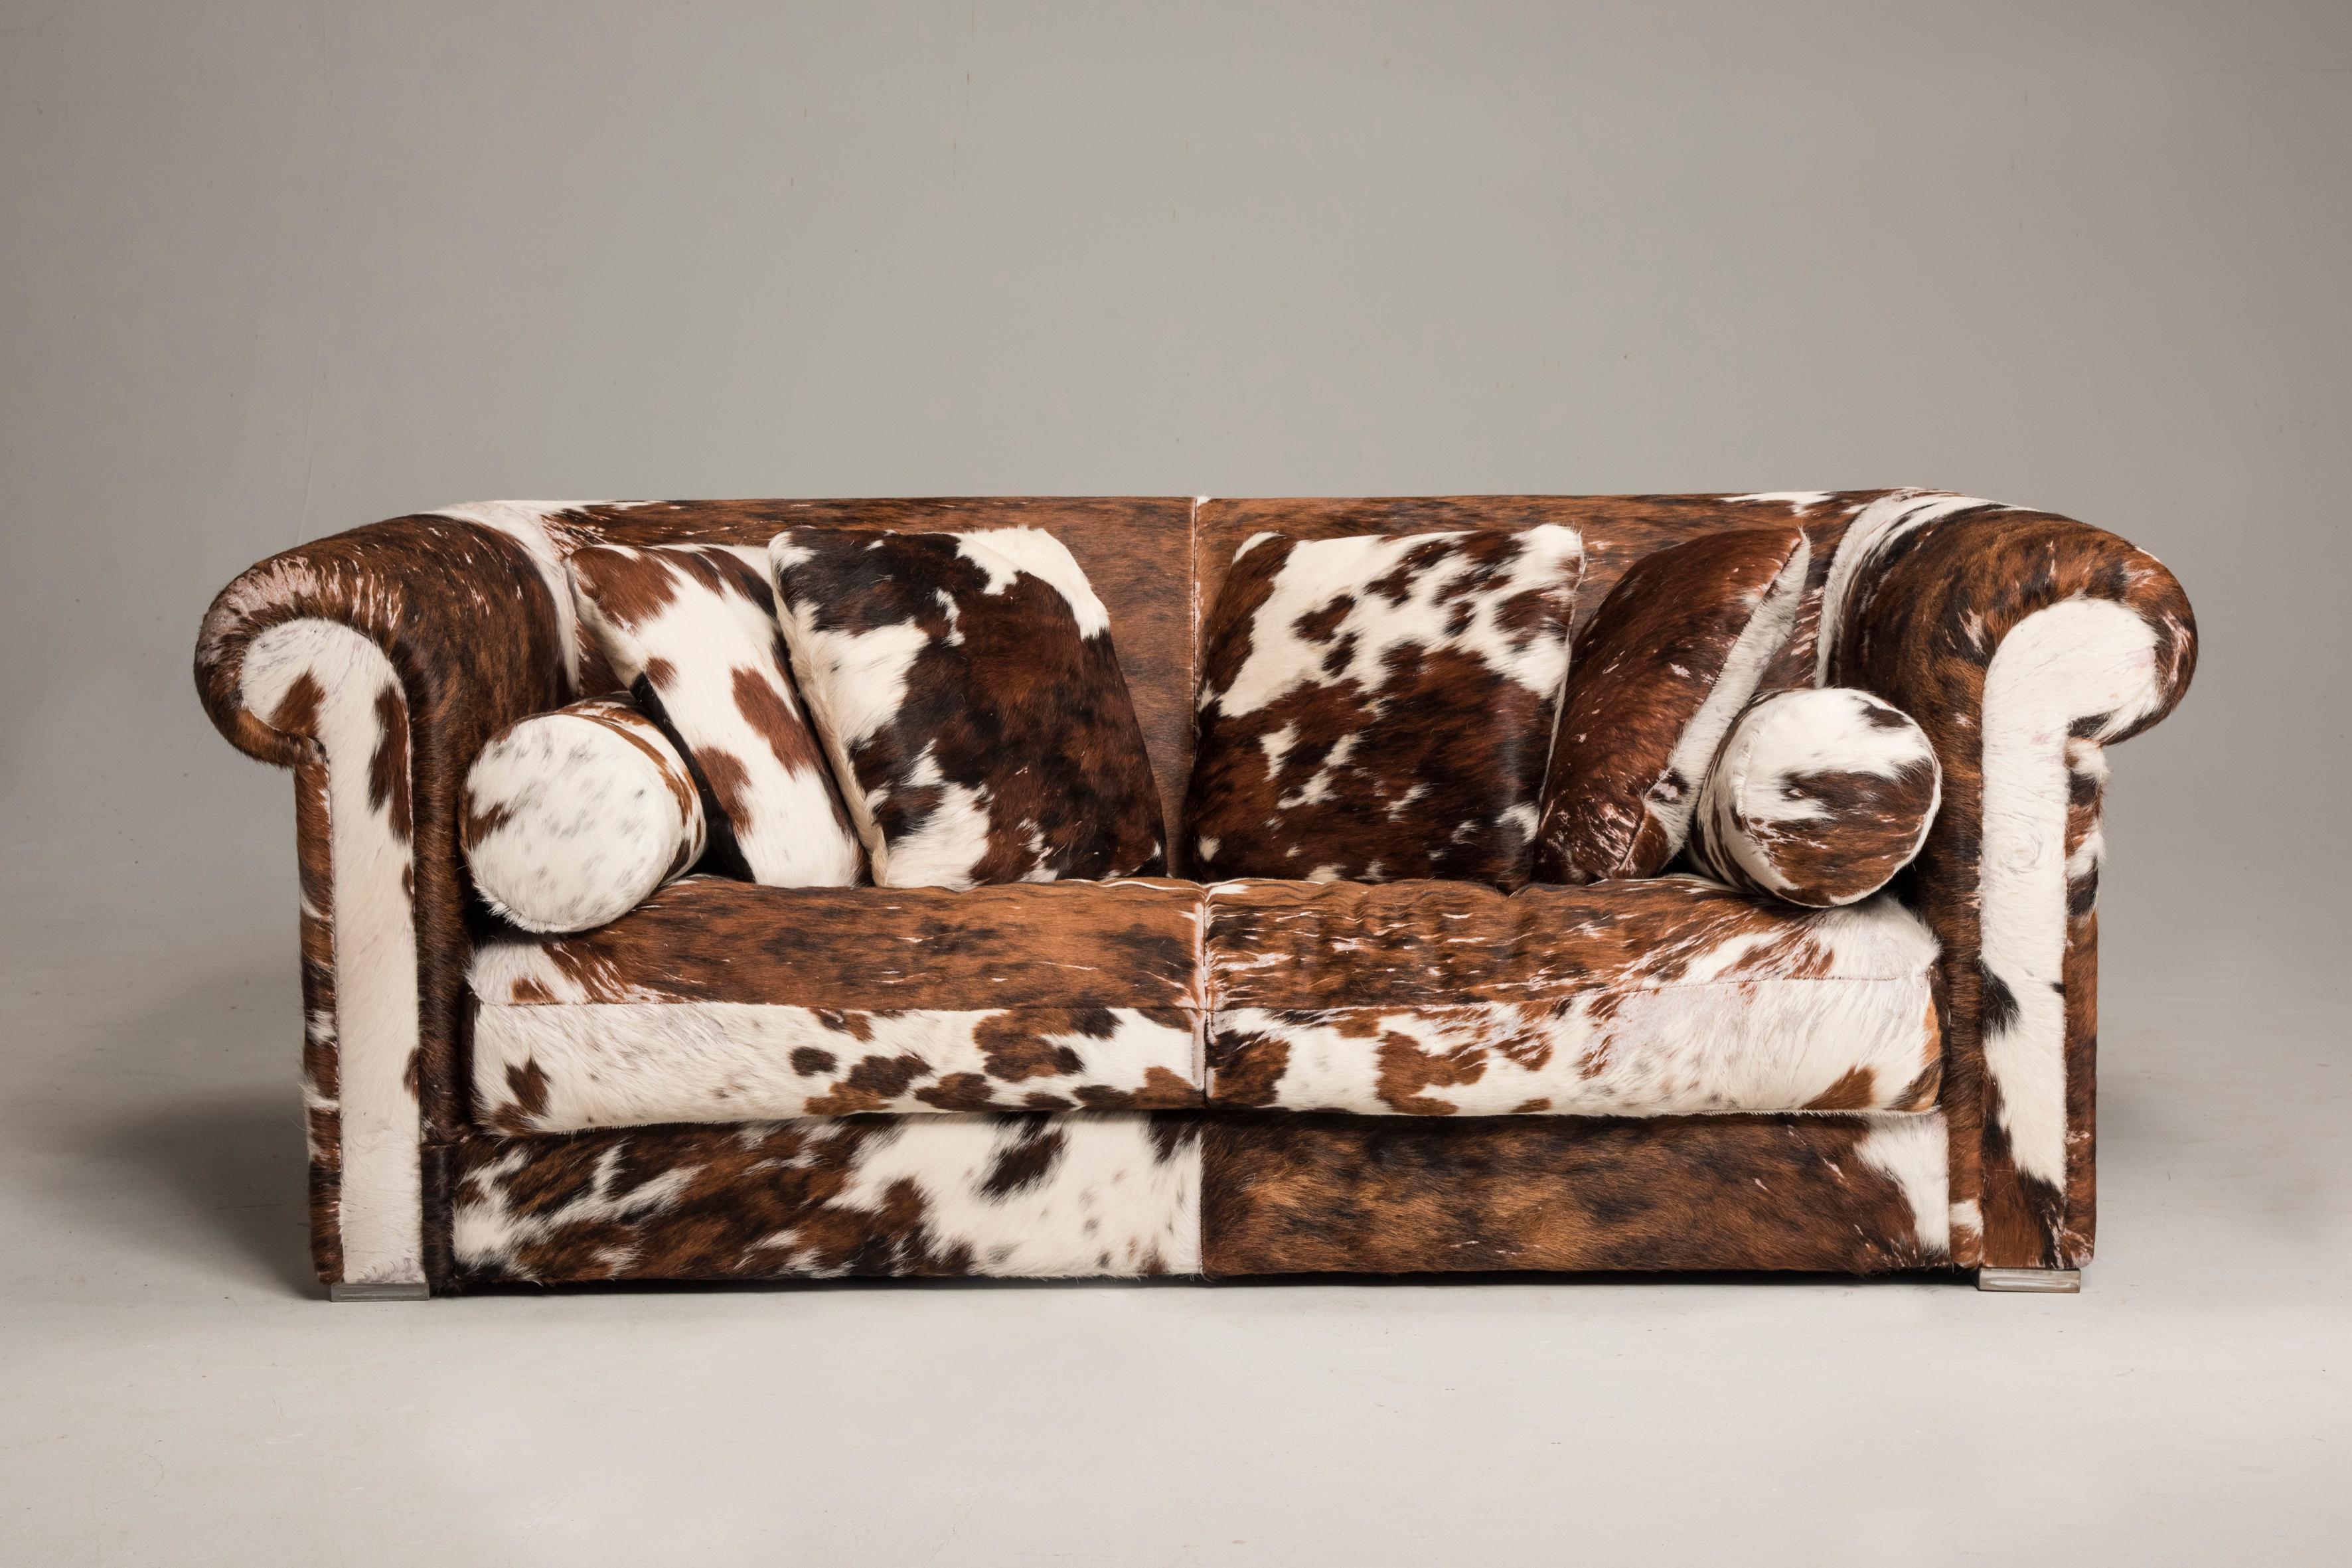 Post-Modern Baxter Brown and White Cow Fur Leather Sofa with Pillows, Italy, 1990s For Sale